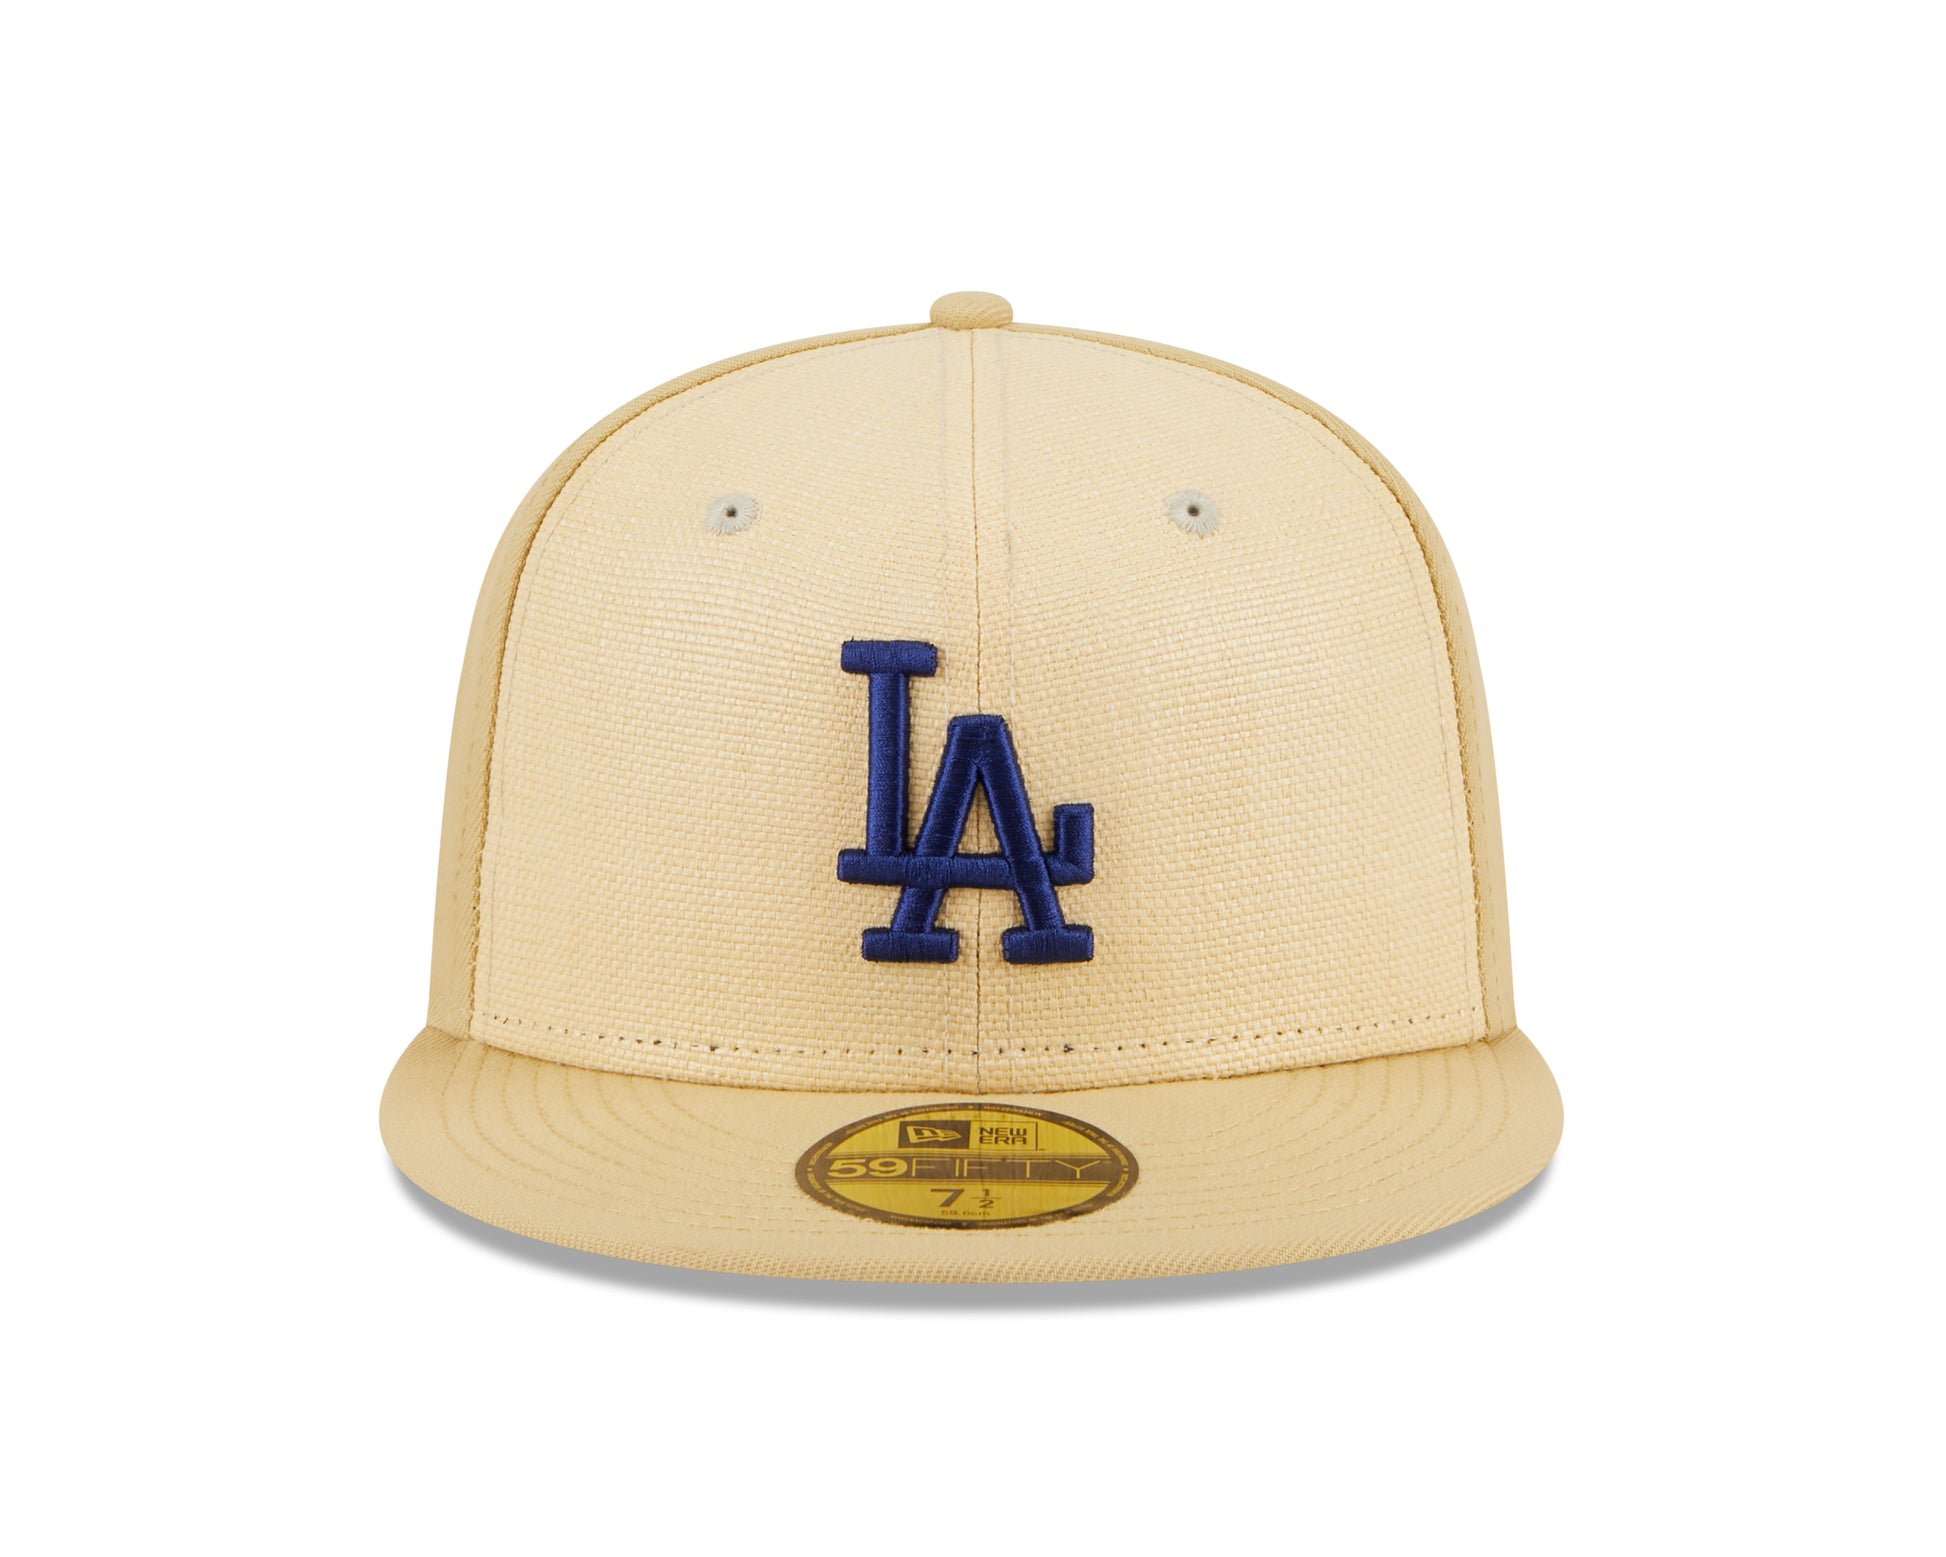 New Era - 59Fifty Fitted Cap - RAFFIA FRONT - Los Angeles Dodgers - Sand - Headz Up 